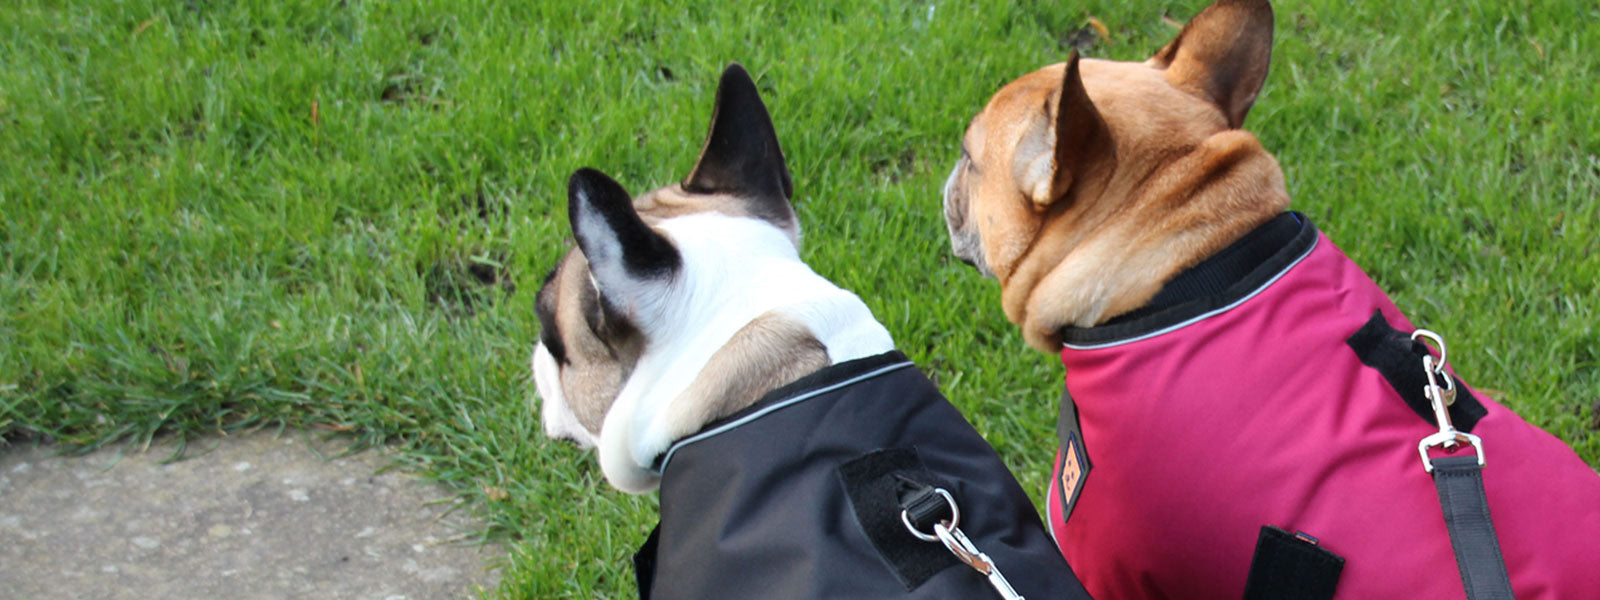 Ginger Ted waterproof dog coats & clothing. Harness compatible for standard breeds, Sitehounds or Dachshunds